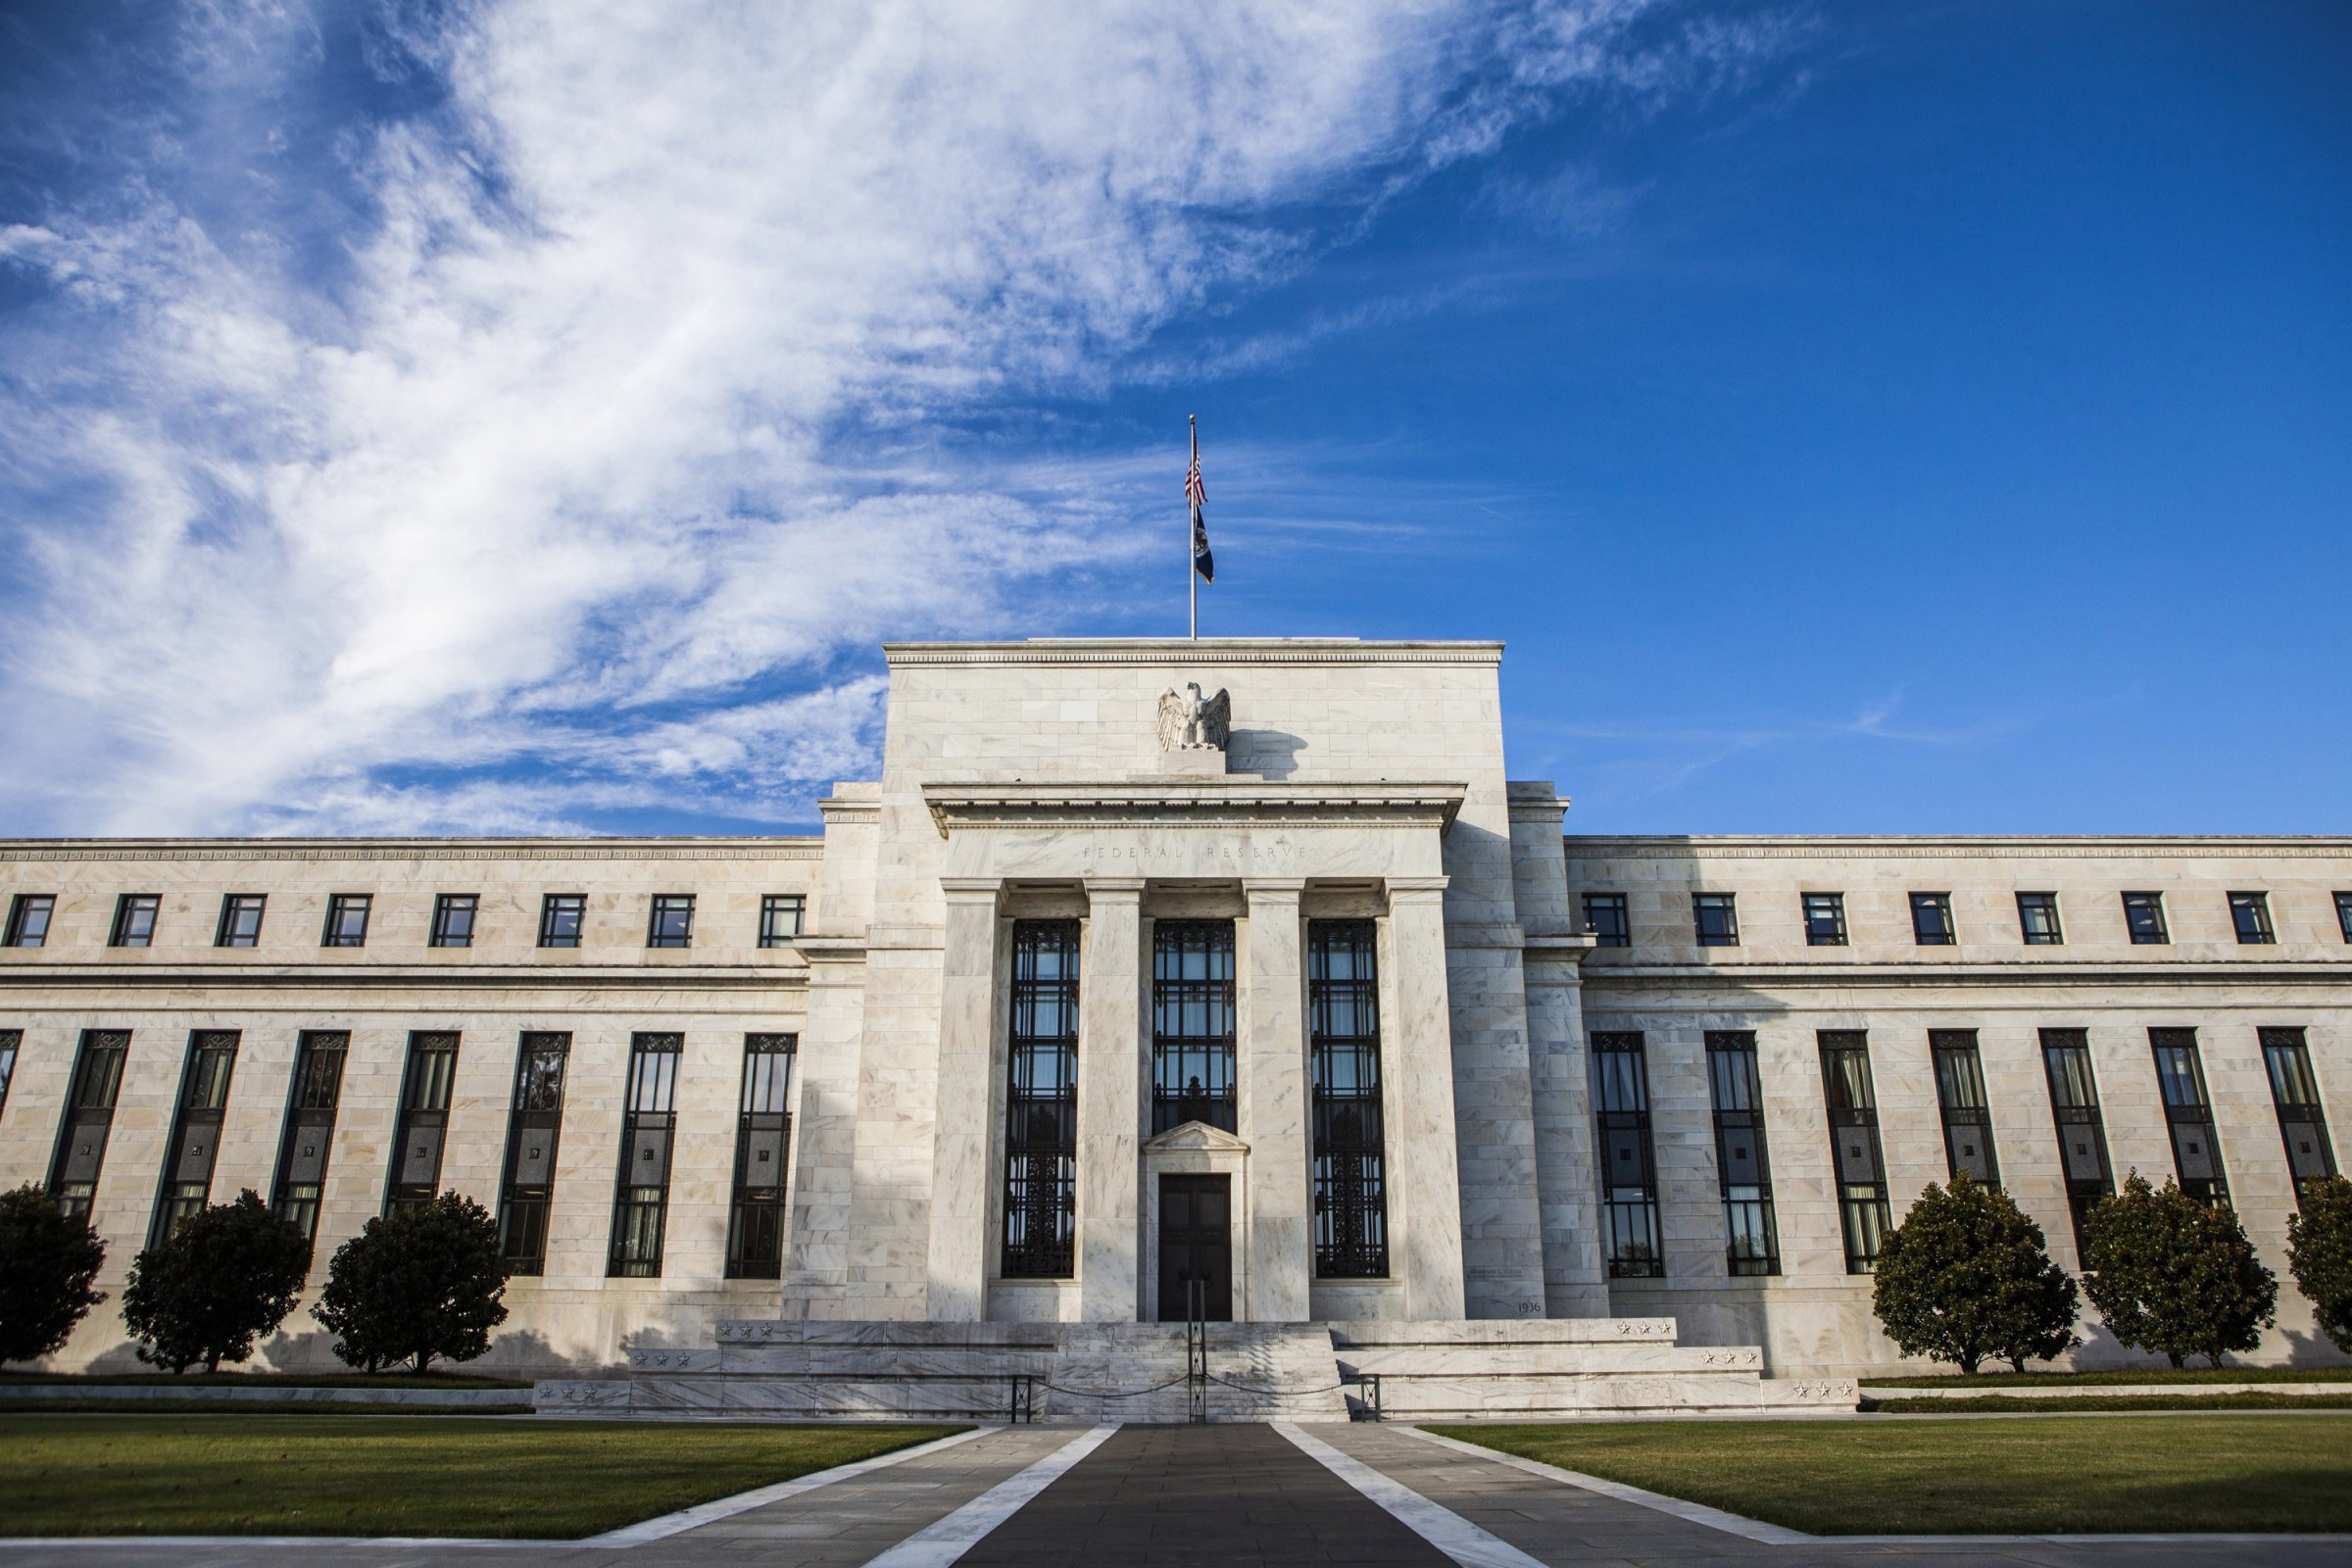 The Federal Reserve Building in Washington, D.C., on Oct. 27, 2014.